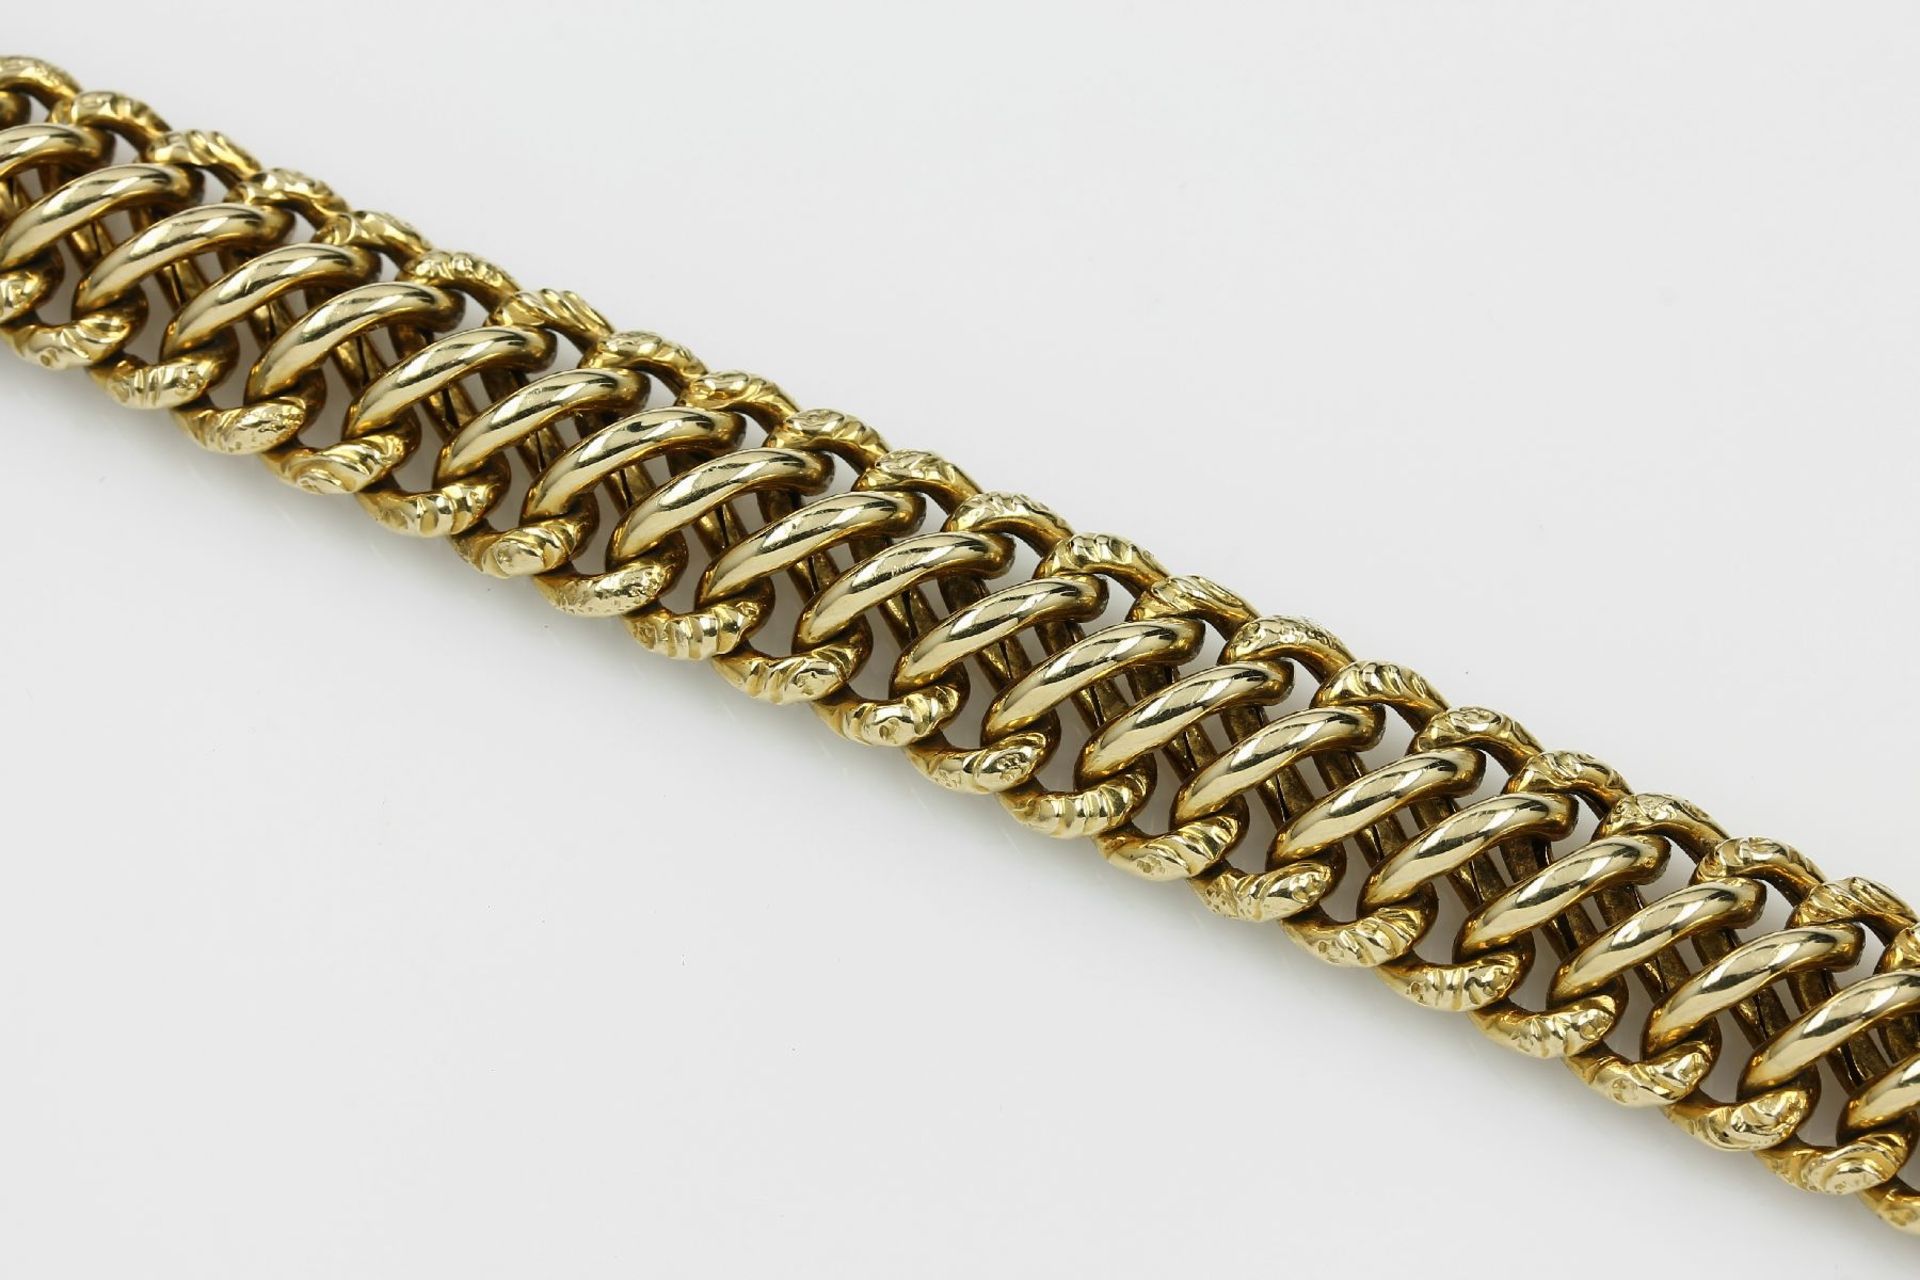 14 kt Gold Armband, GG 585/000, total ca. 26.7 g, Meistermarke unged., L. ca. 19.5 cm,